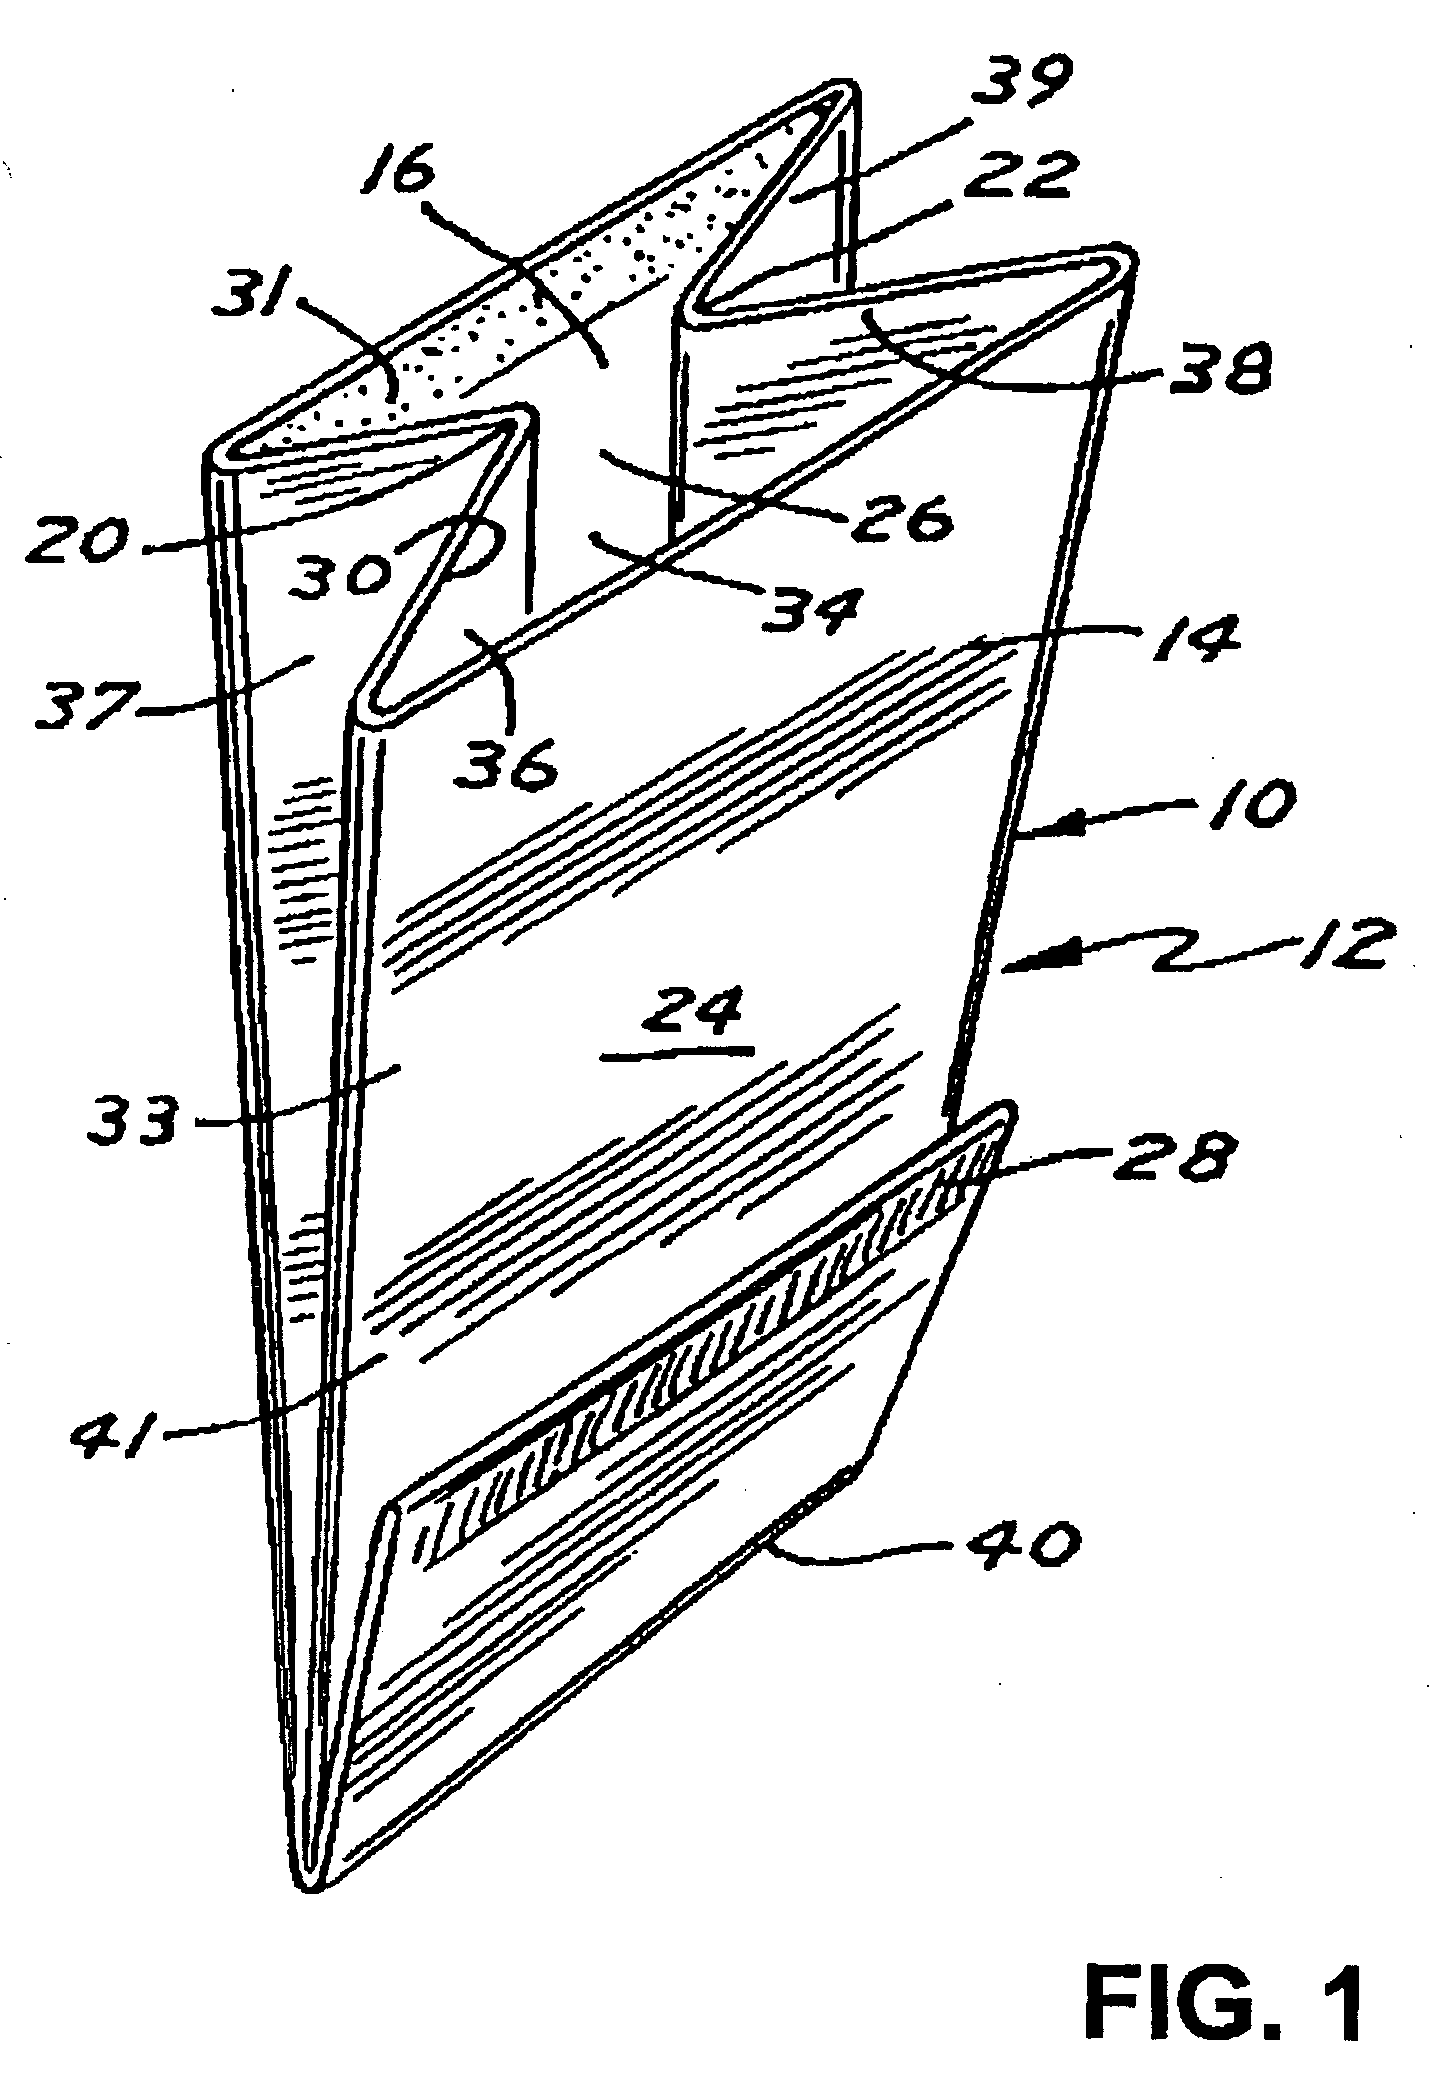 Microwave popcorn with viscous liquid fat and method of preparation